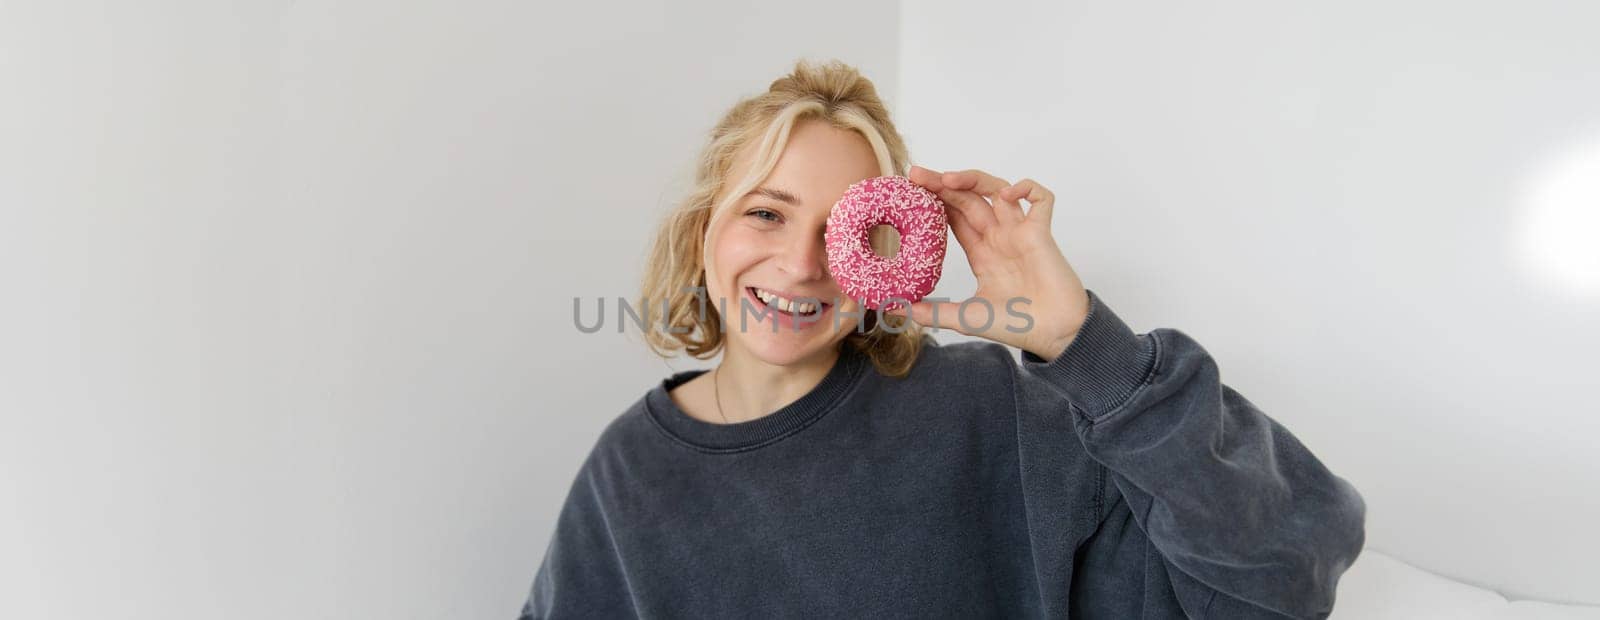 Close up portrait of happy, cute blond woman, holding doughnut, eating sweet, delicious comfort food, showing dessert at camera. Food concept